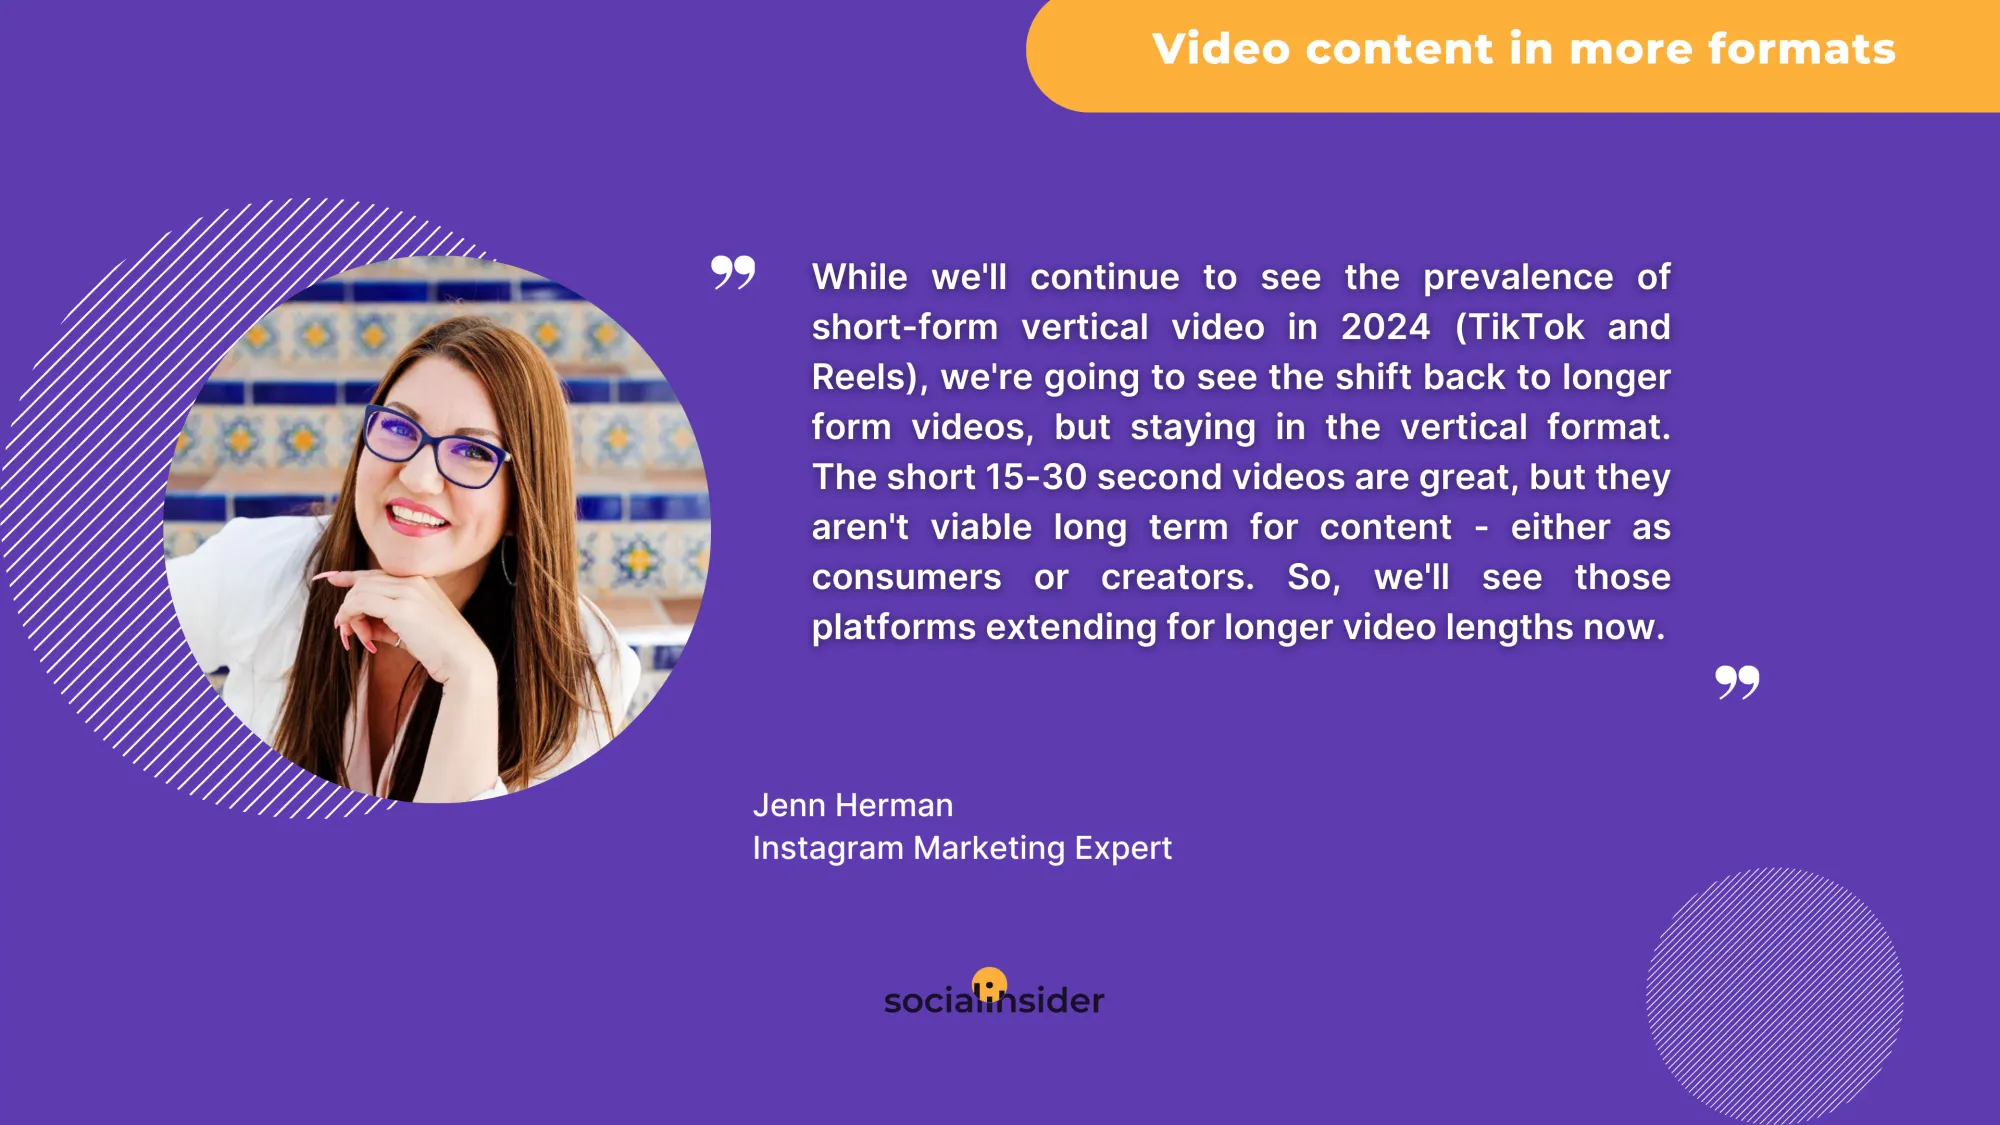 this is a quote from Jenn Herman related to social media trends and short form content